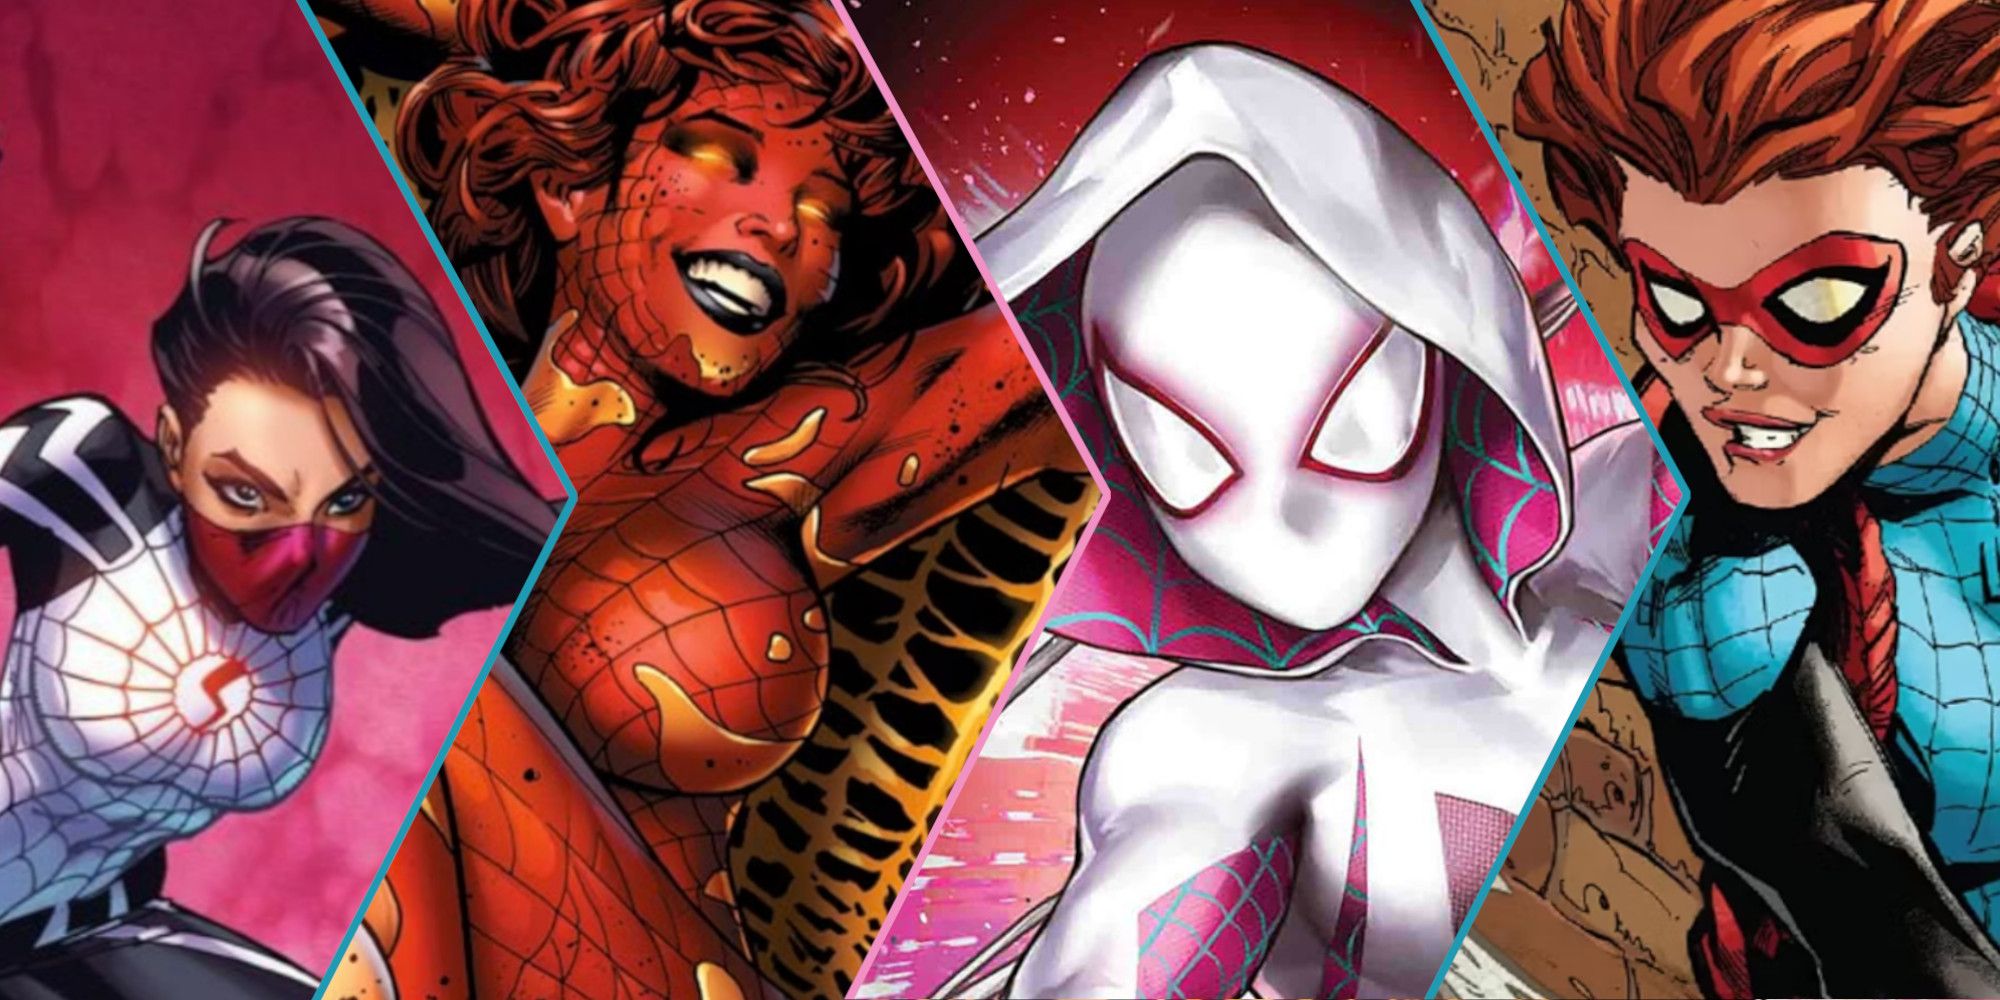 amazon, marvel: strongest female characters with powers like spider-man